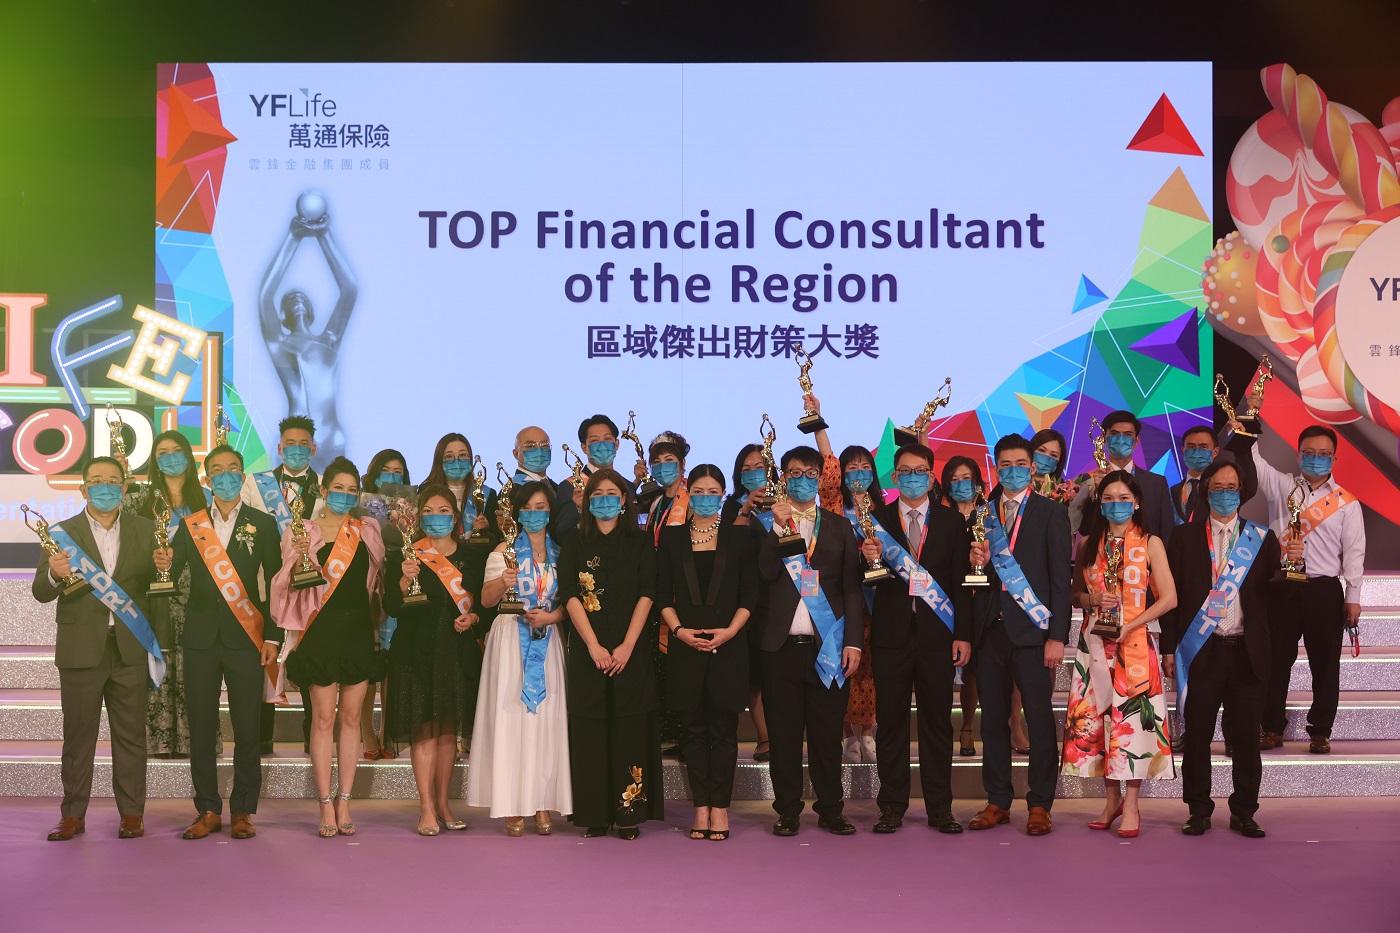 Winners of Top Financial Consultant of the Region. 